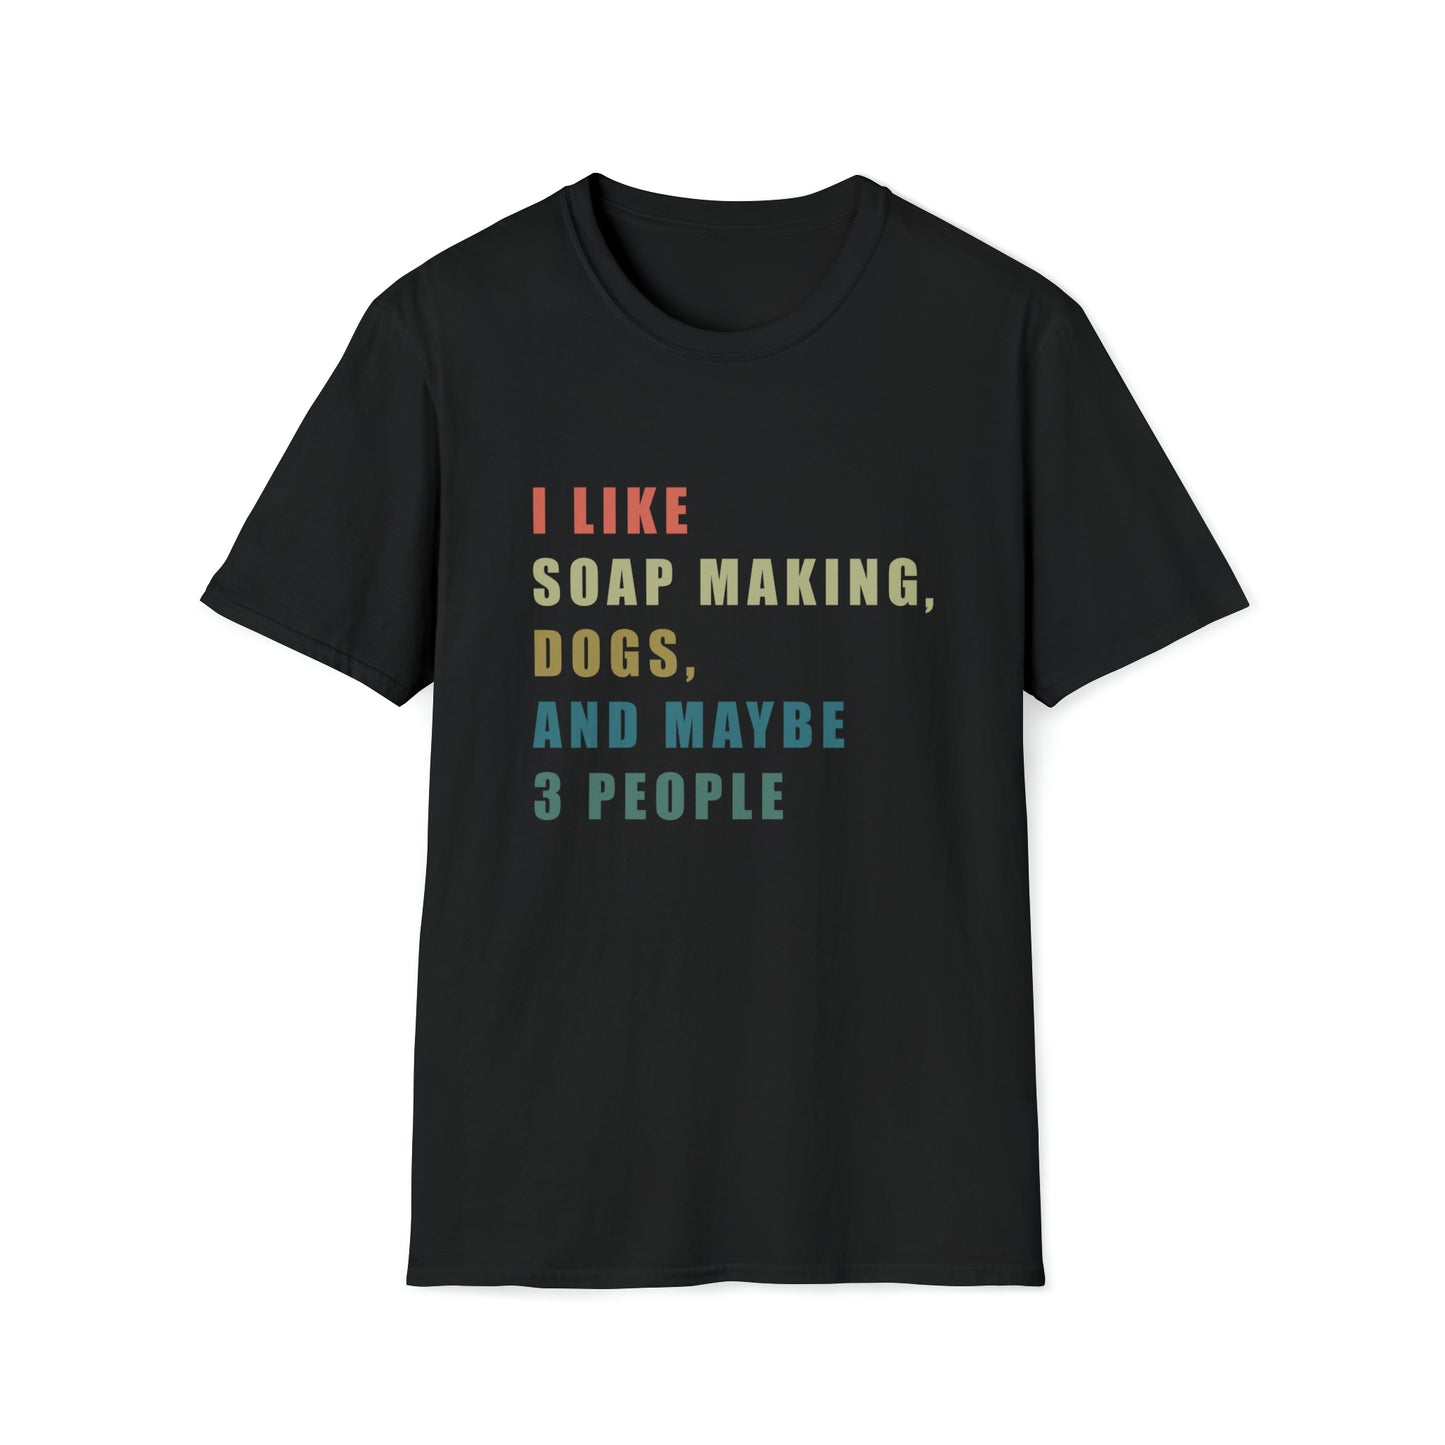 I Like Soap Making, Dogs, and Maybe 3 People T-Shirt